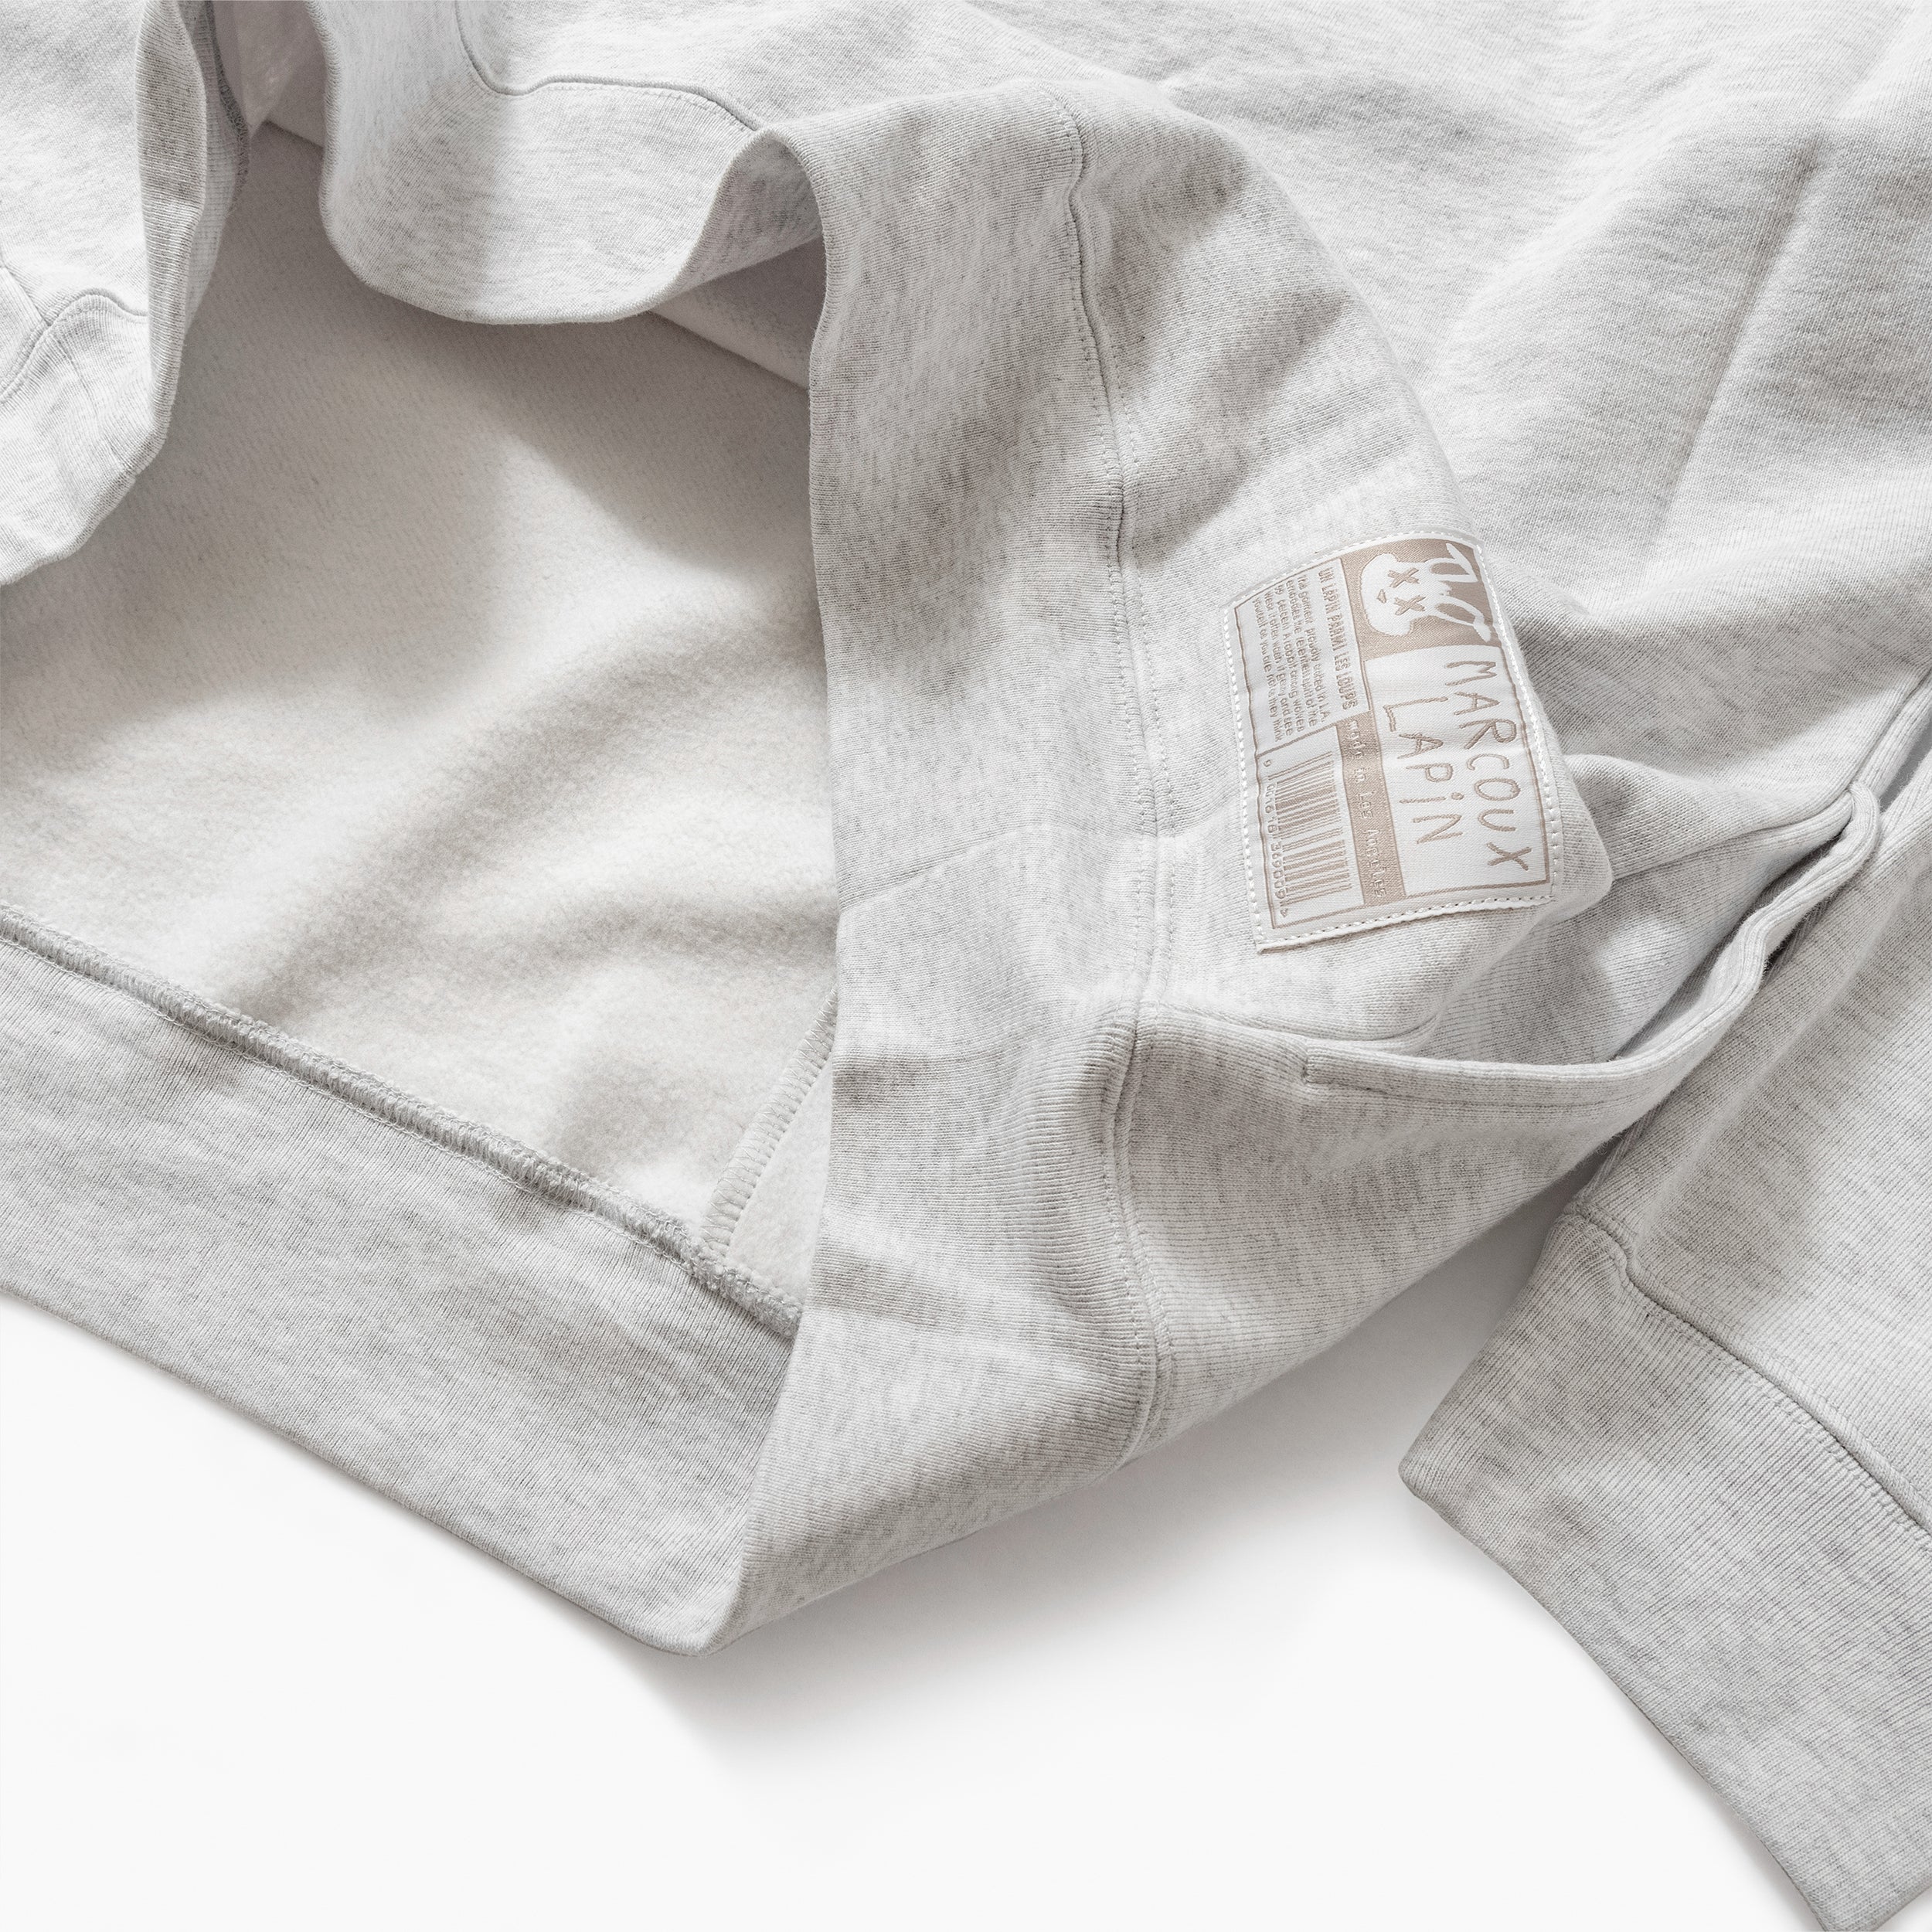 The Socialite Society Article Sweatshirt with side-pockets (Heather Gray)